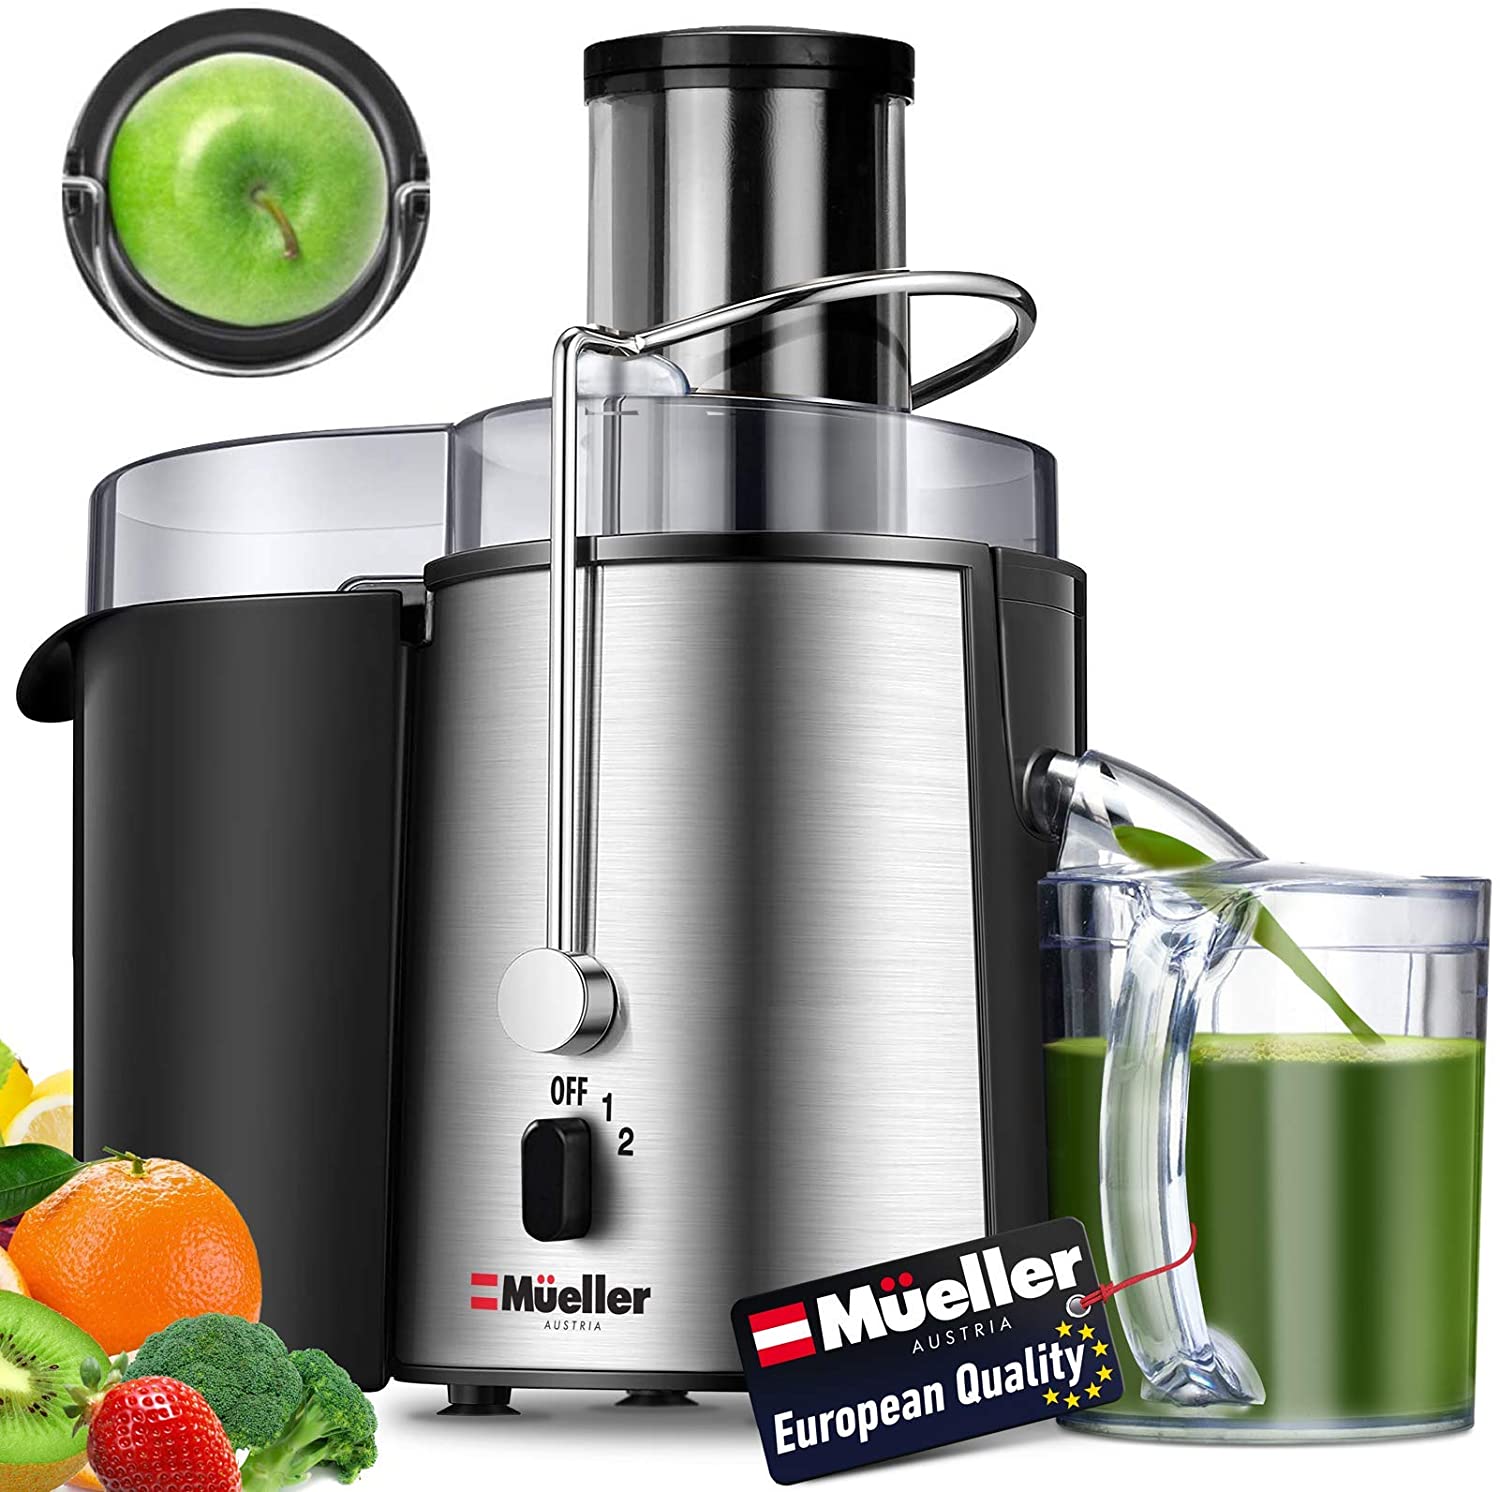 Picture of Mueller Centrifugal Juicer on White Background